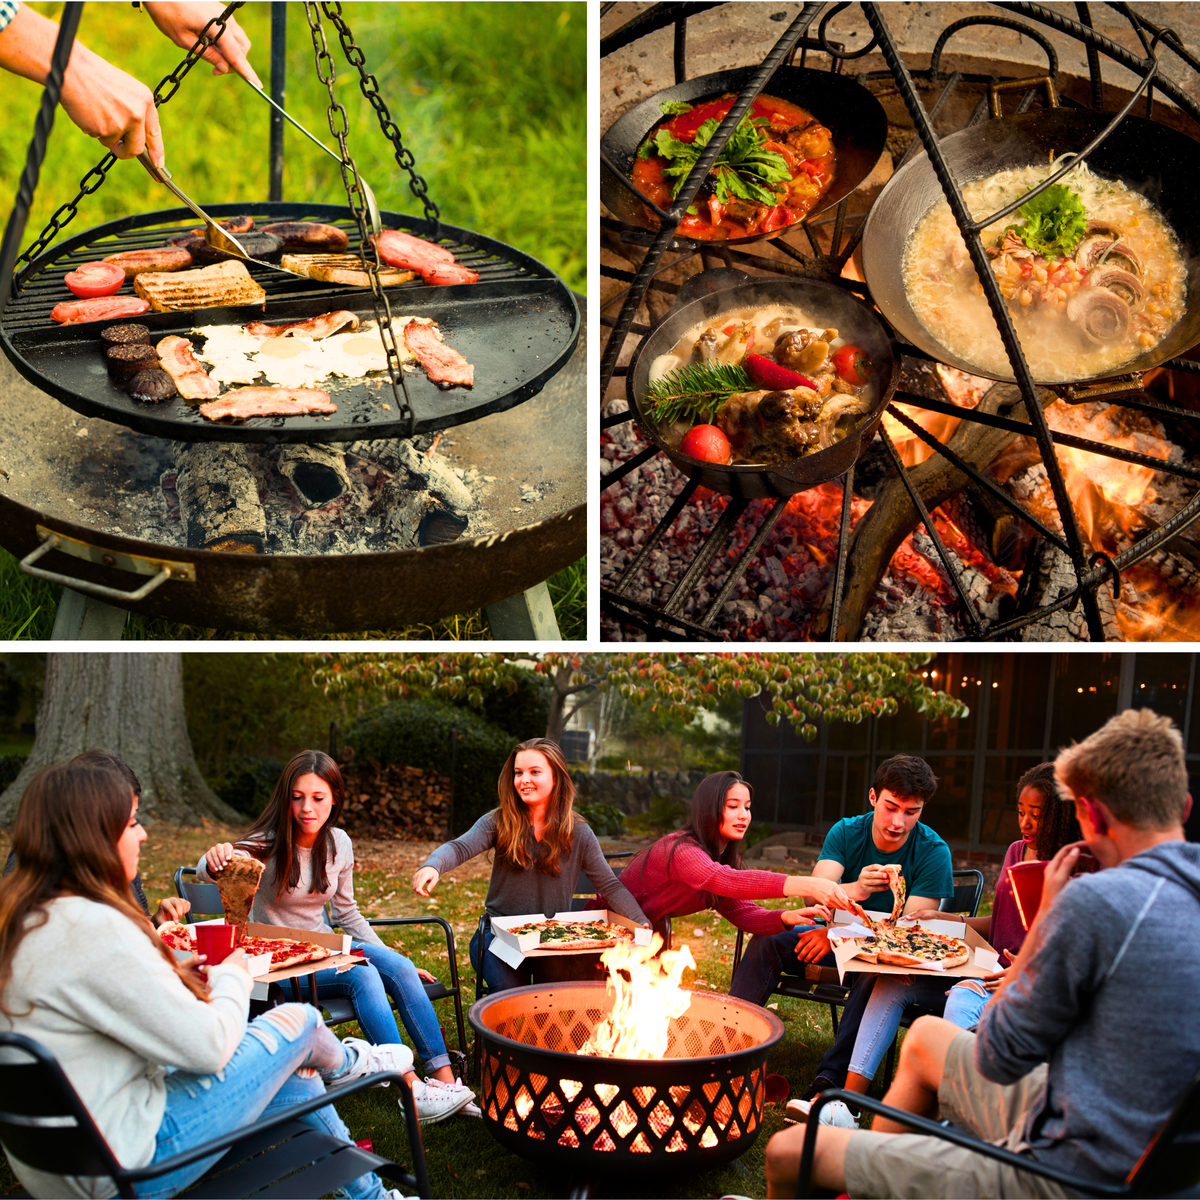 Three pictures of food cooking over fire pits and people enjoying camaraderie